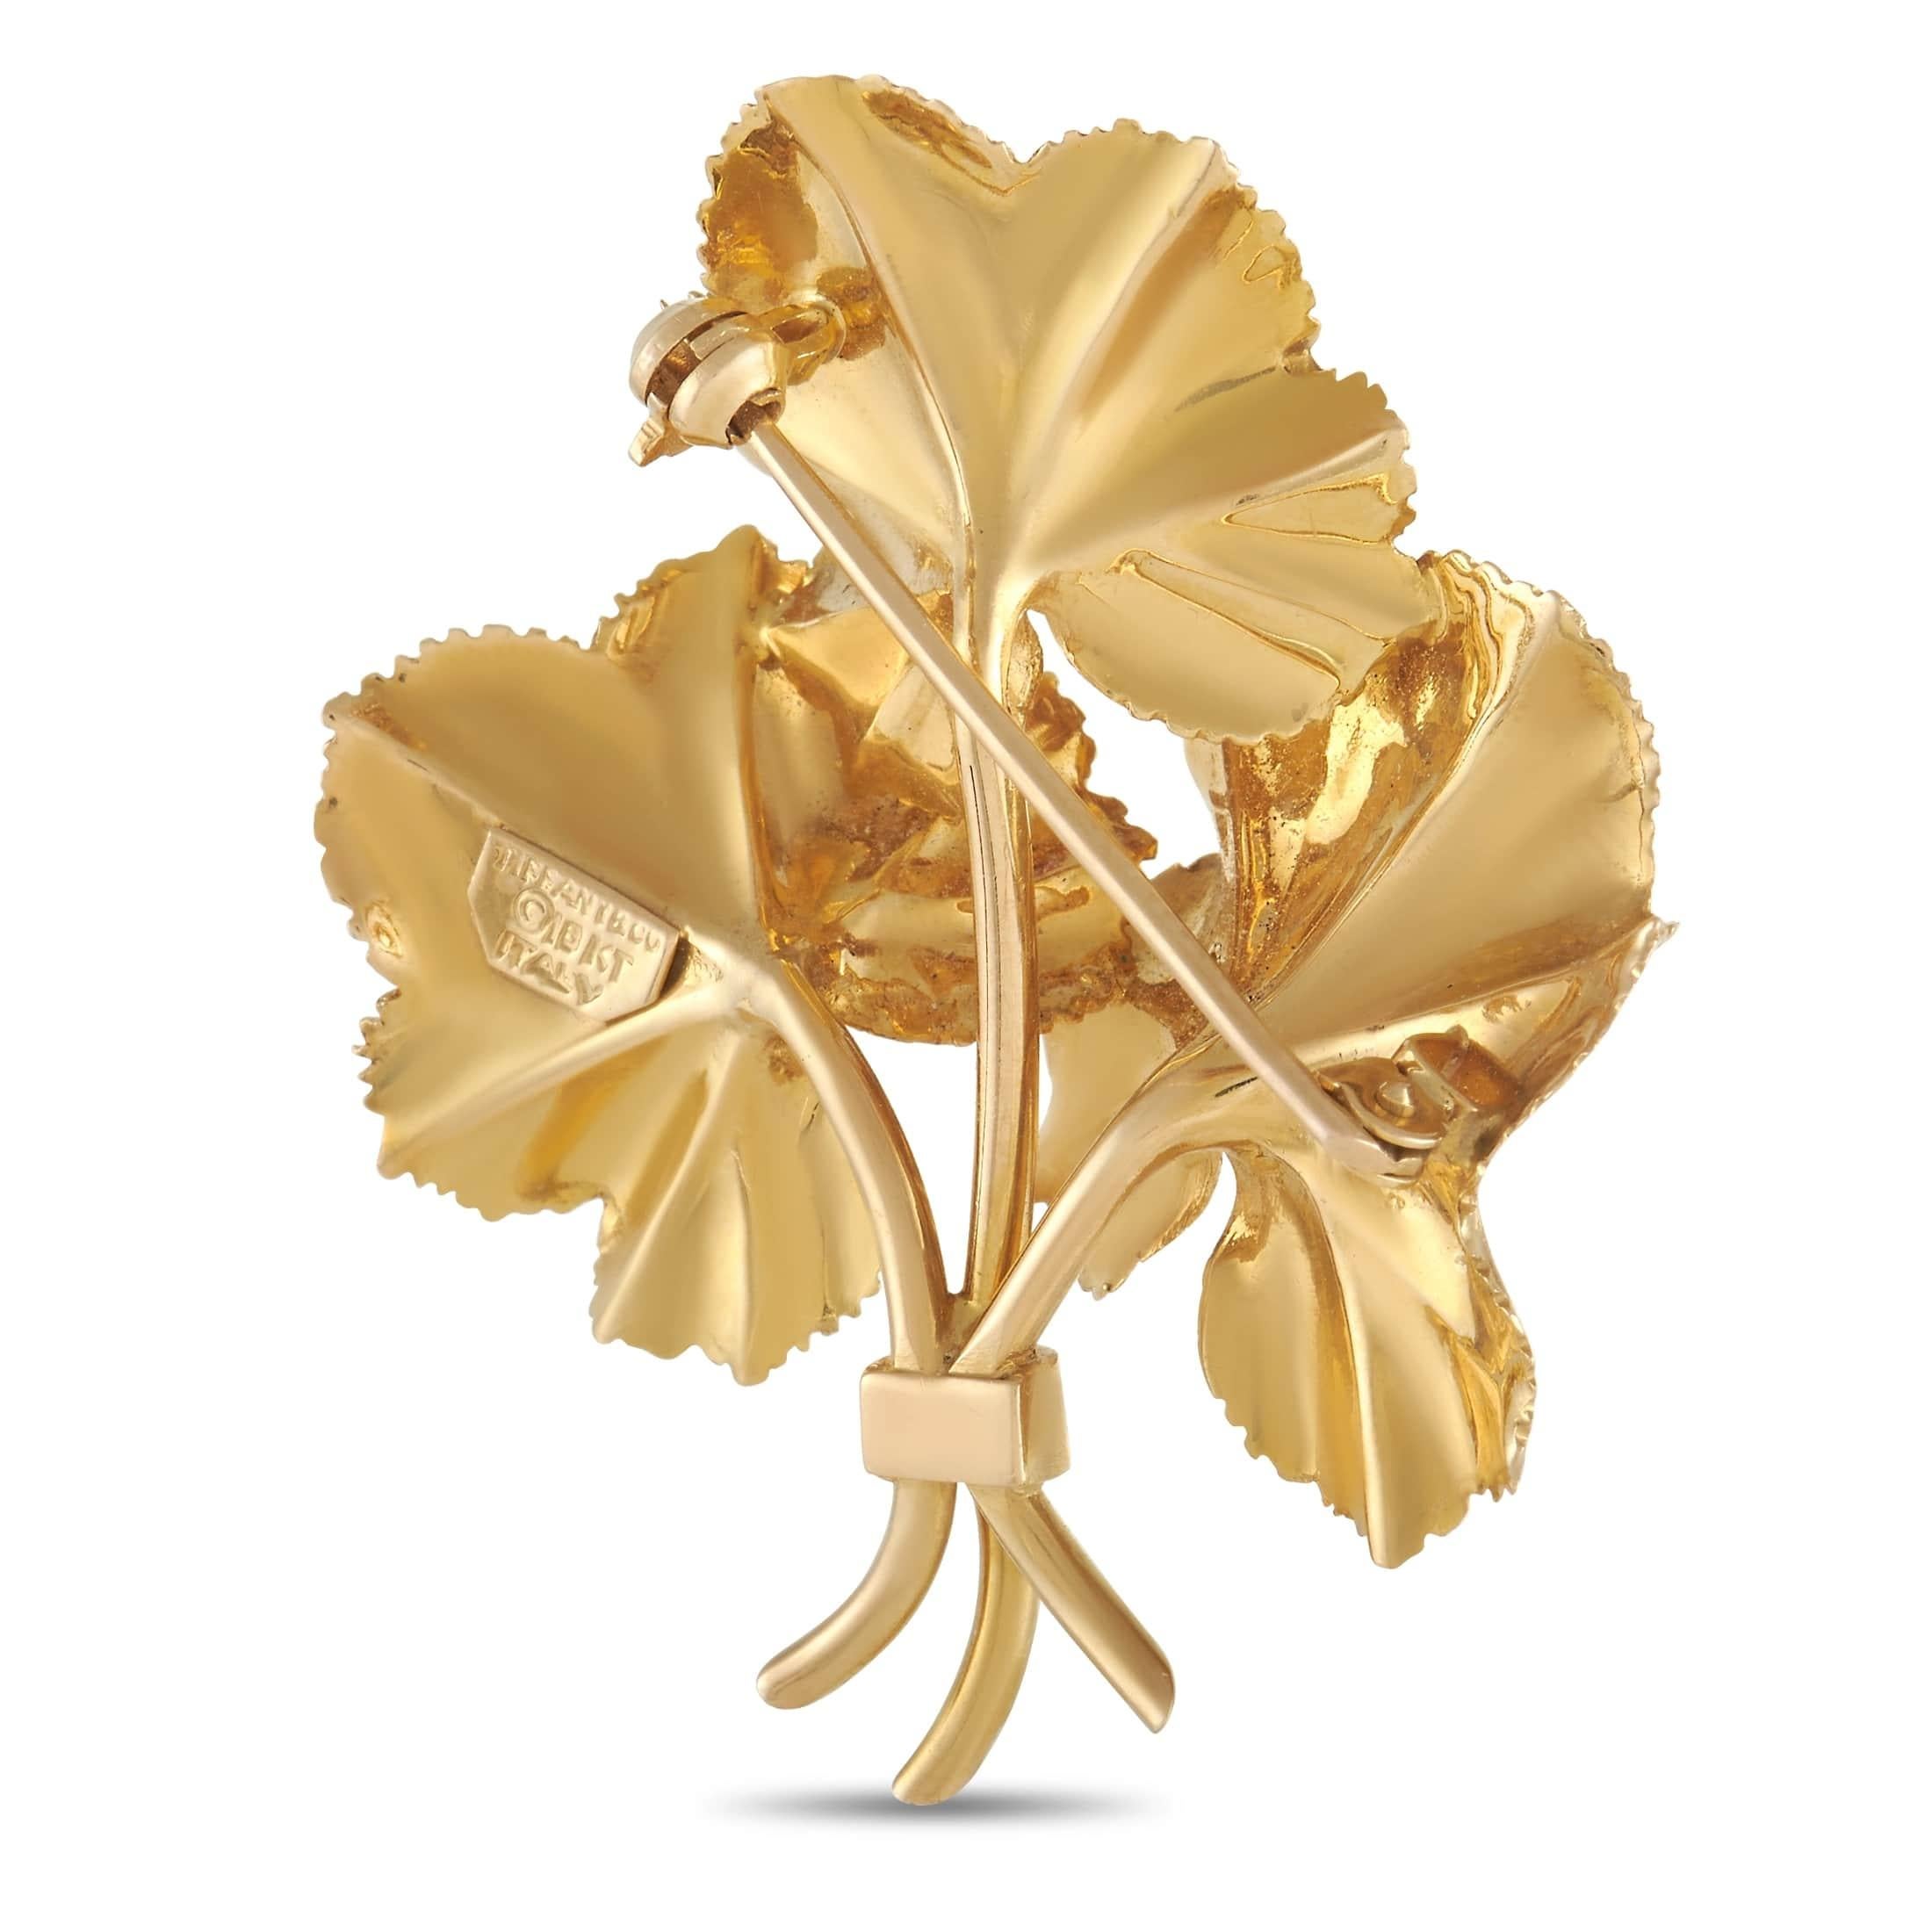 This lovely flower brooch from Tiffany & Co. features a trio of beautiful flowers crafted and detailed in 18K yellow gold. The center of each flower is marked with a cluster of small round rubies. The brooch measures 1.88 inches by 1.5 inches and